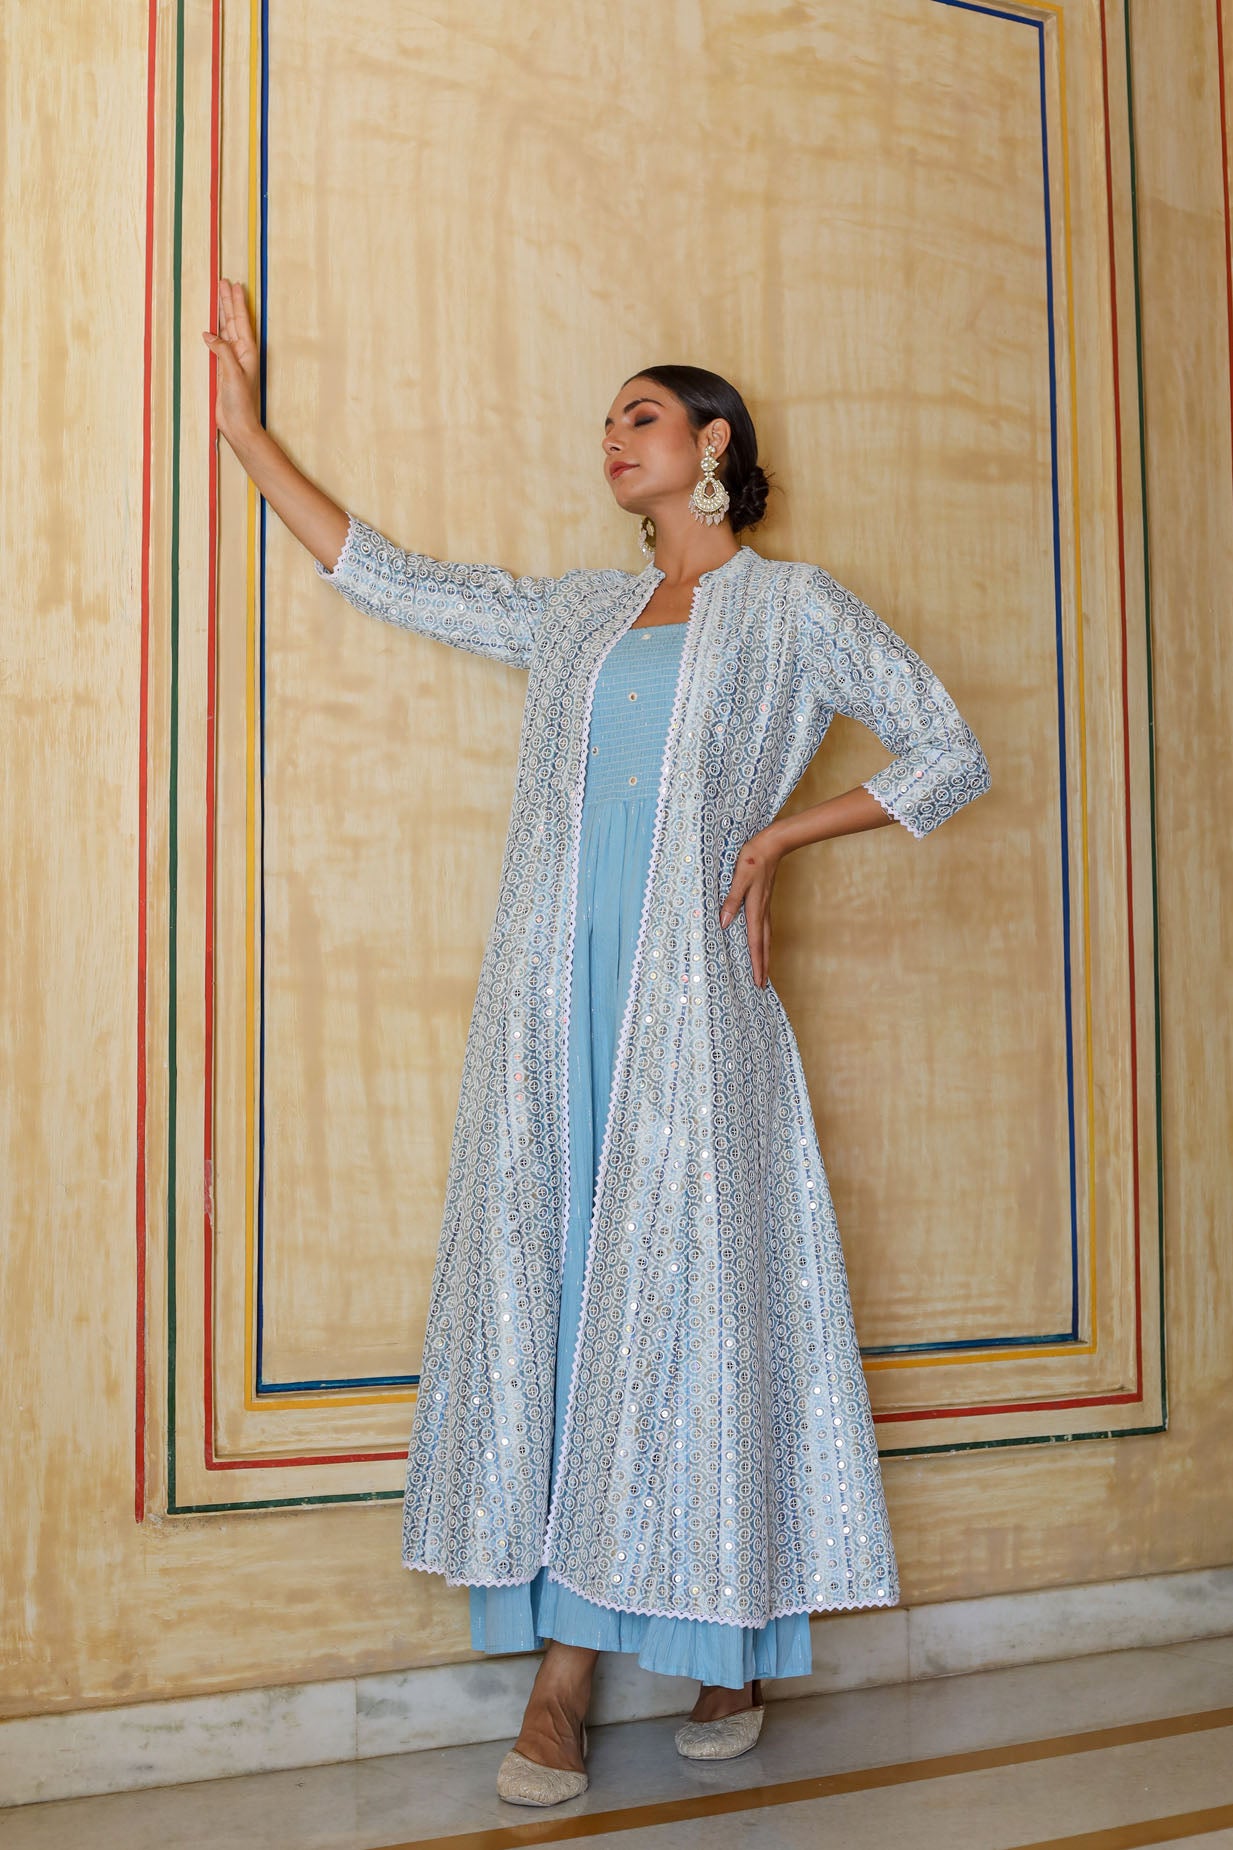 The Blue Lavishness Long Gown